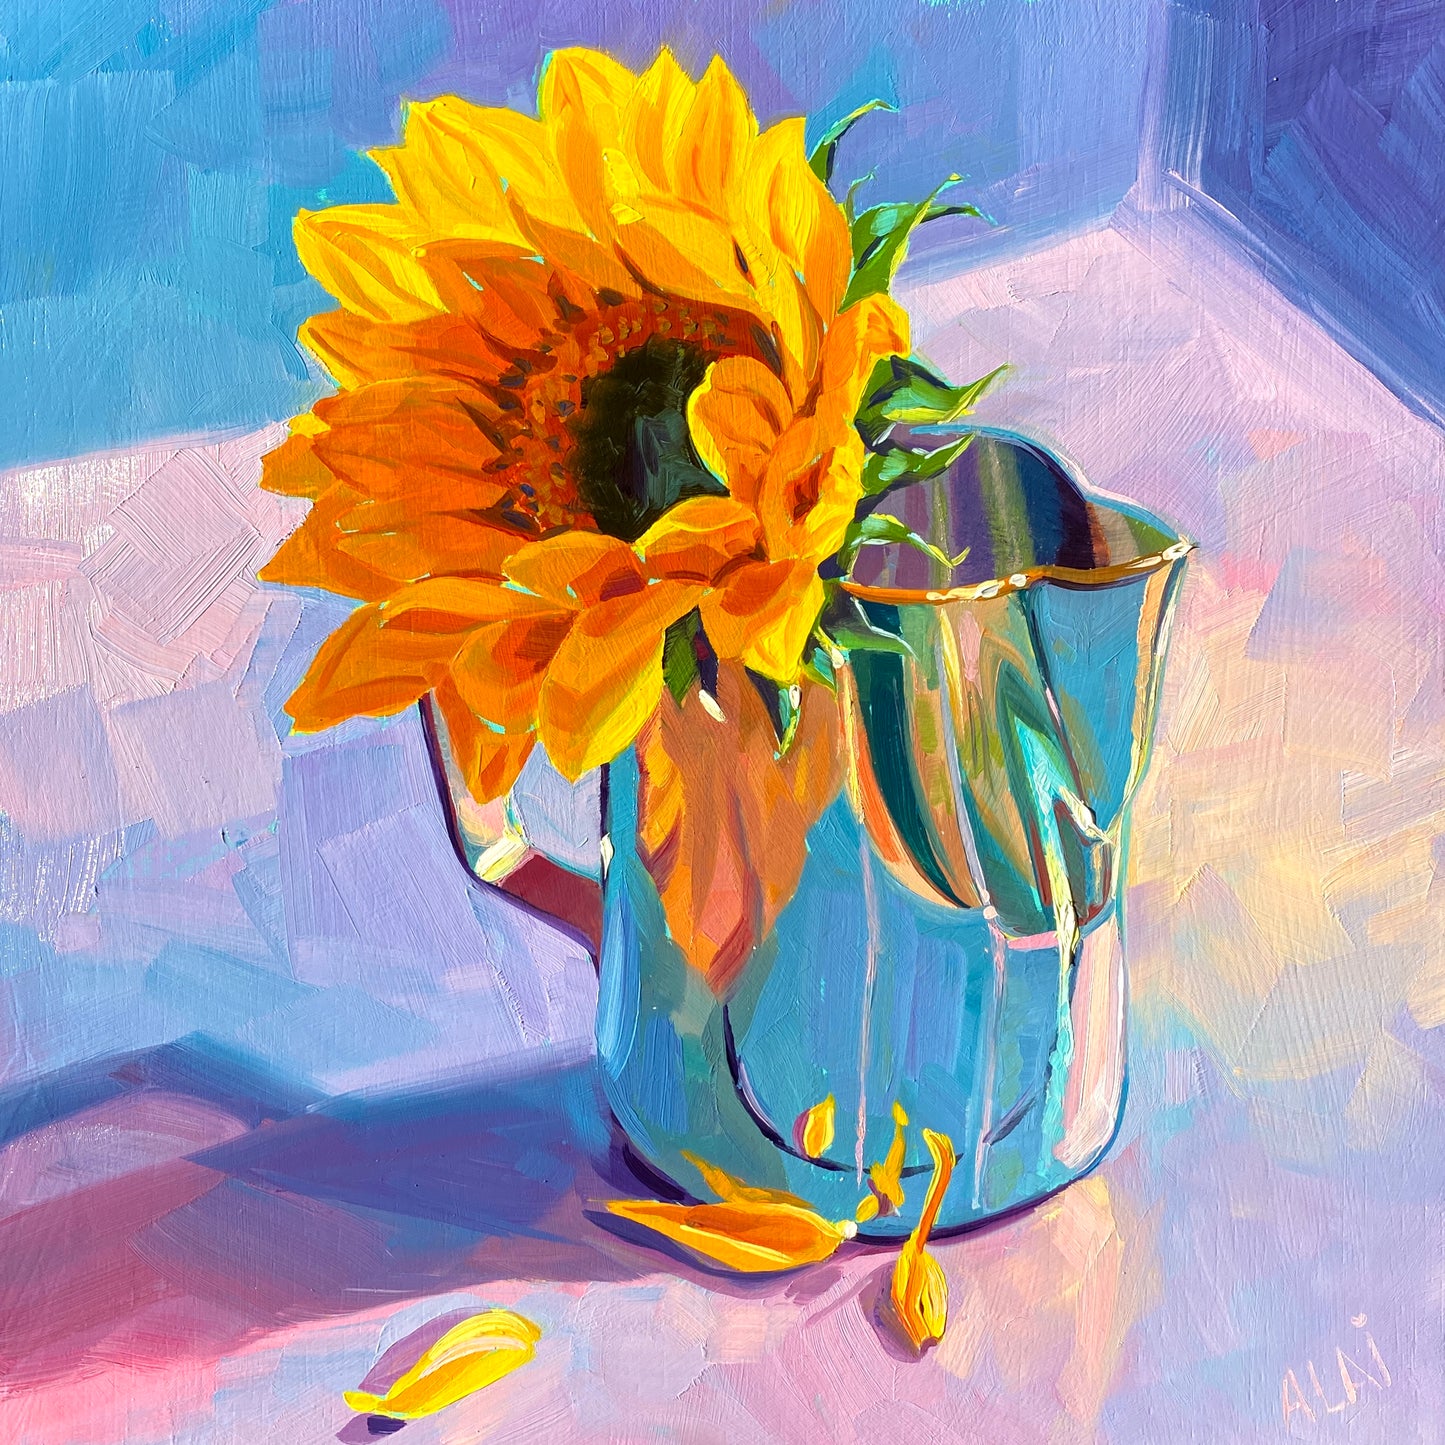 Sunflower in a jar - Oil painting Print